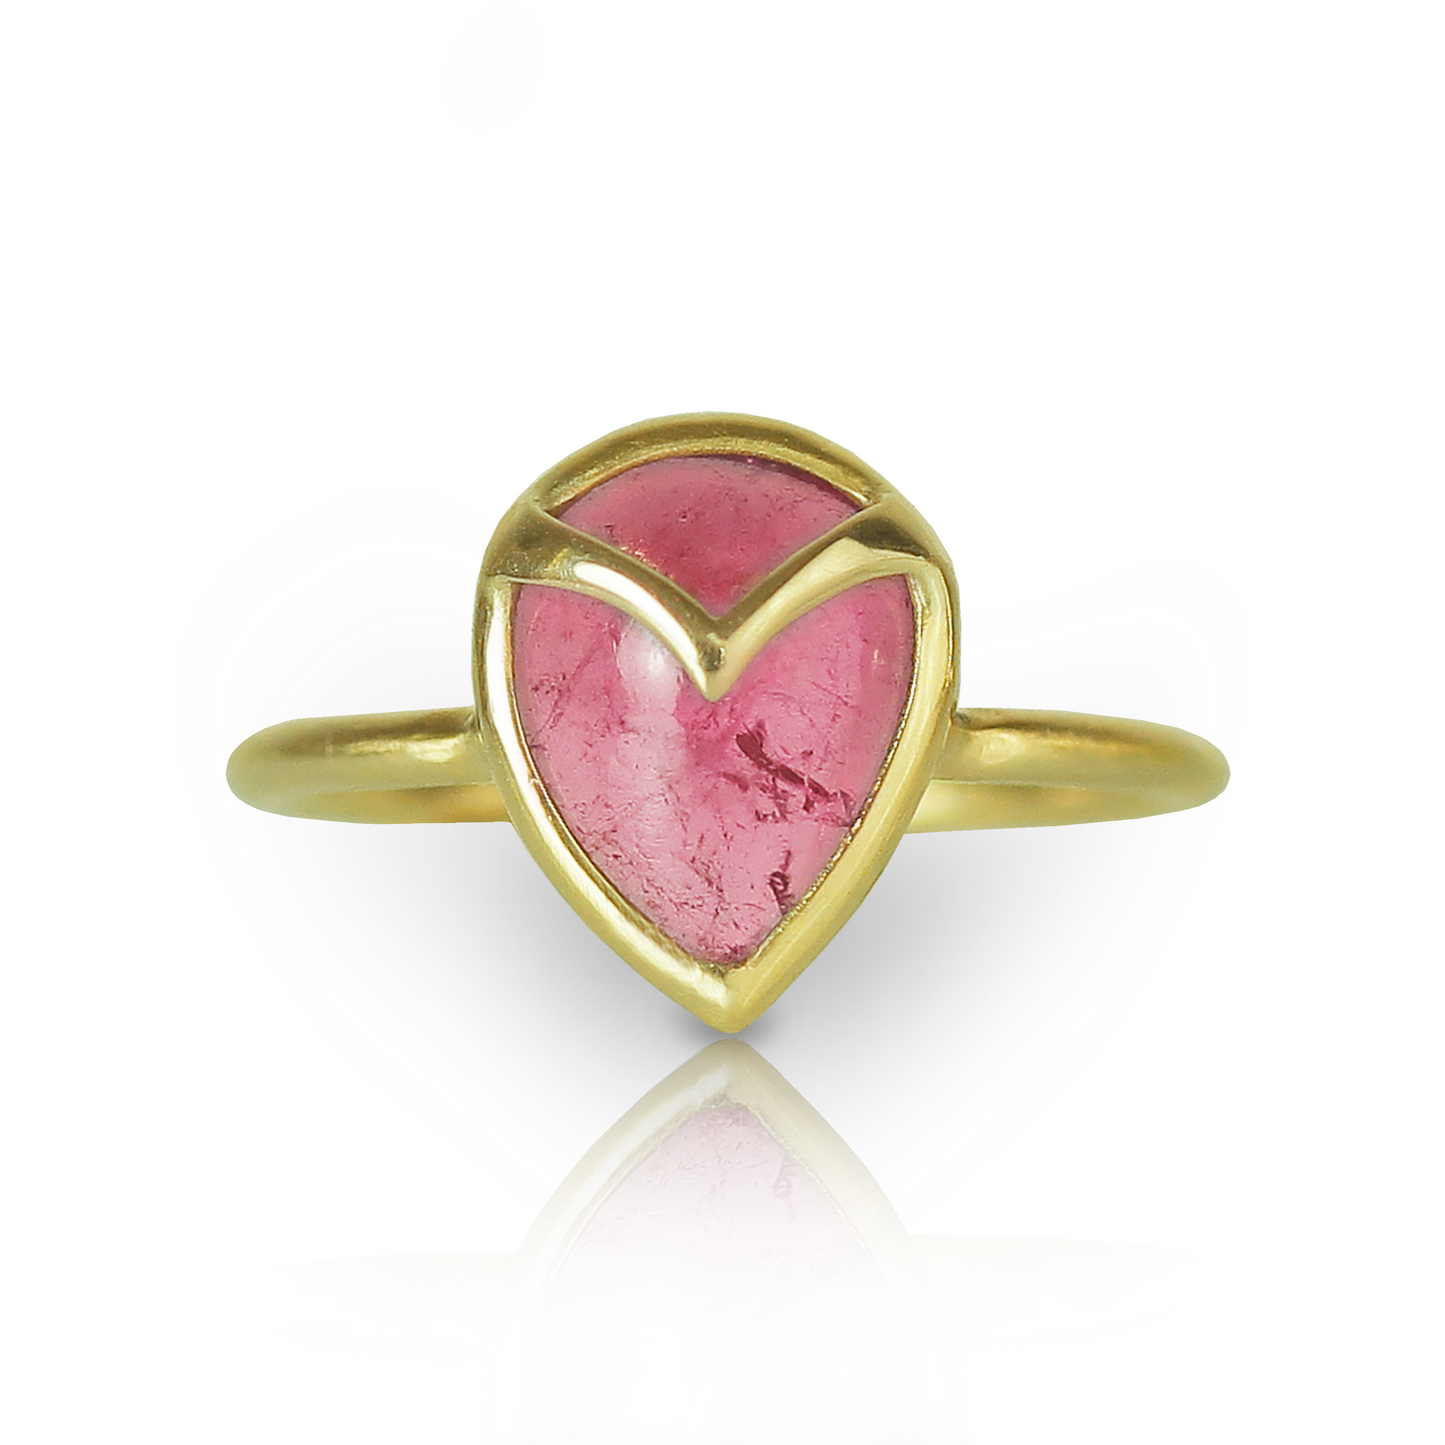 Yellow gold ring with a teardrop-shaped pink tourmaline, and gold owl beak detail